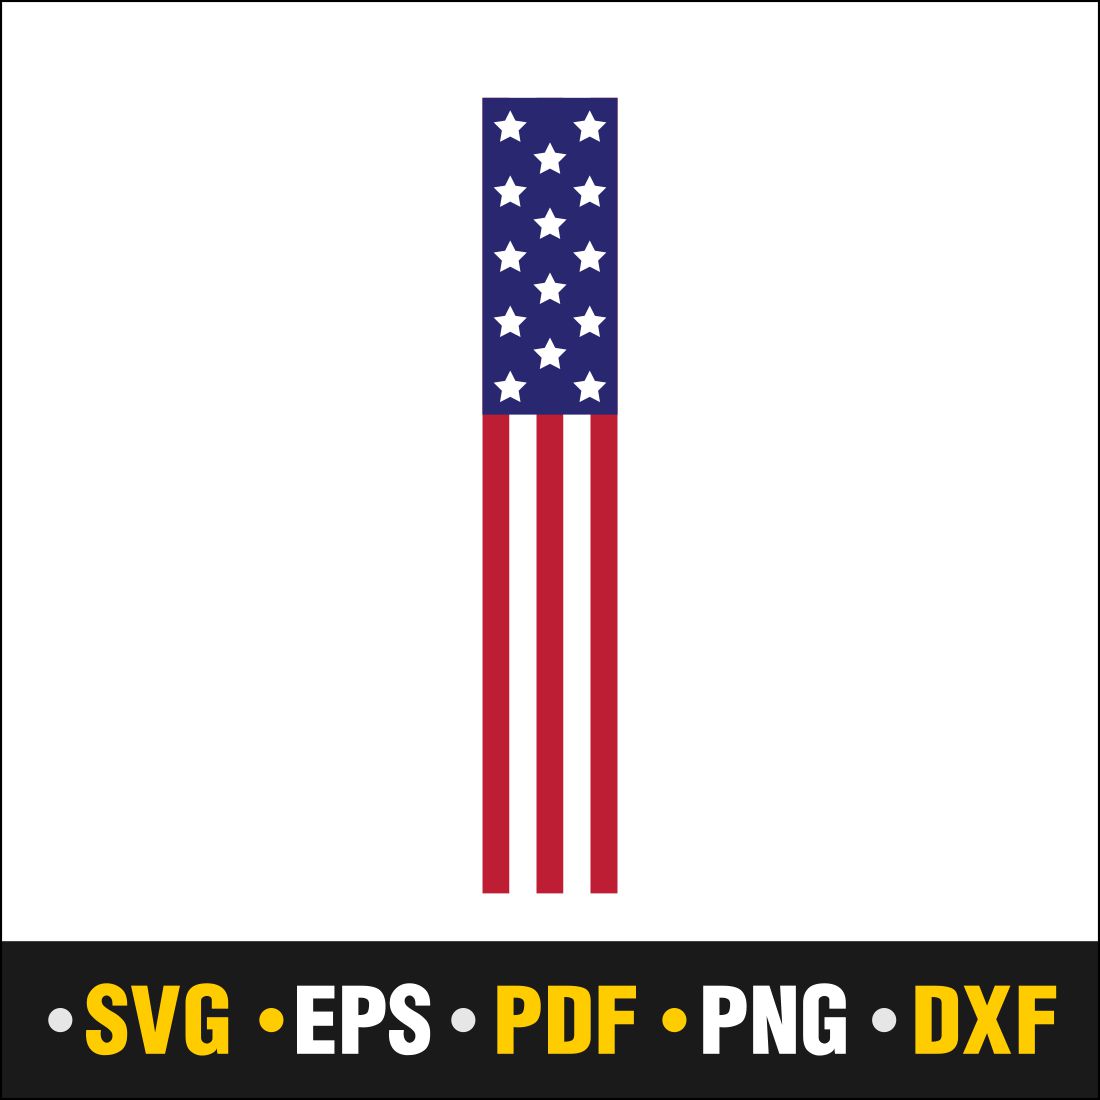 Flag Porch Sign Svg, July 4 Porch Sign svg, Porch SIgn png, Vector Cut file Cricut, Silhouette, Pdf Png, Dxf, Decal, Sticker, Stencil, Vinyl cover image.